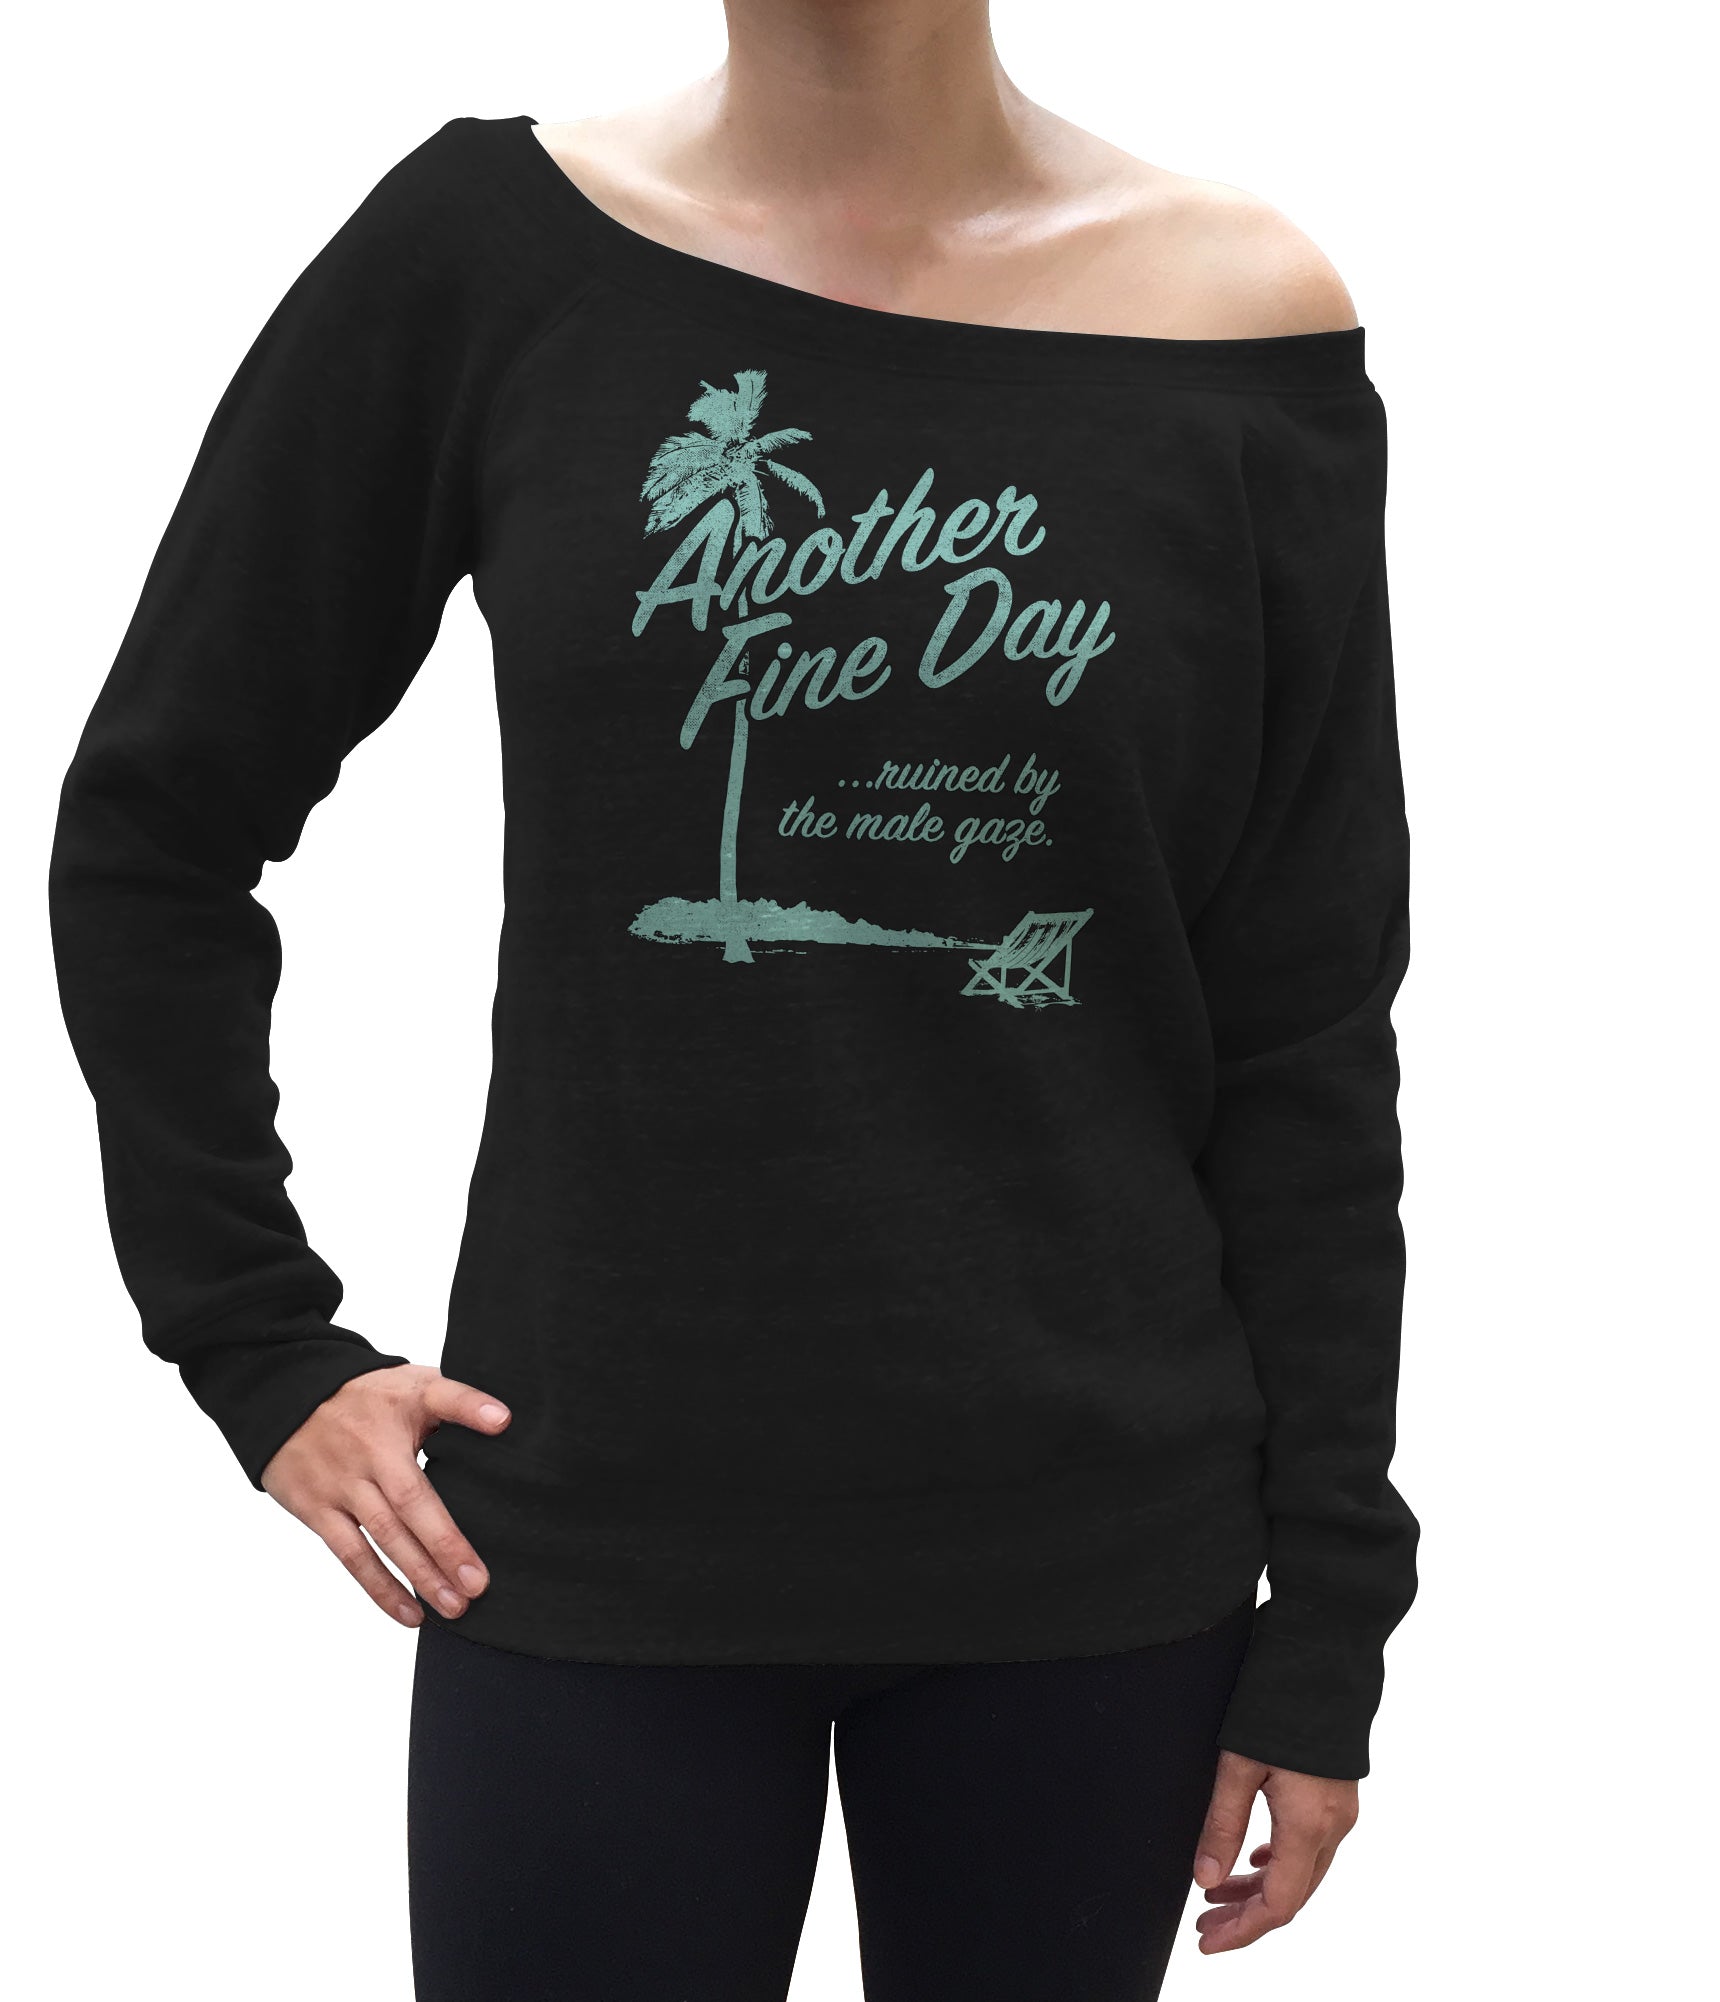 Women's Another Fine Day Ruined by the Male Gaze Scoop Neck Fleece